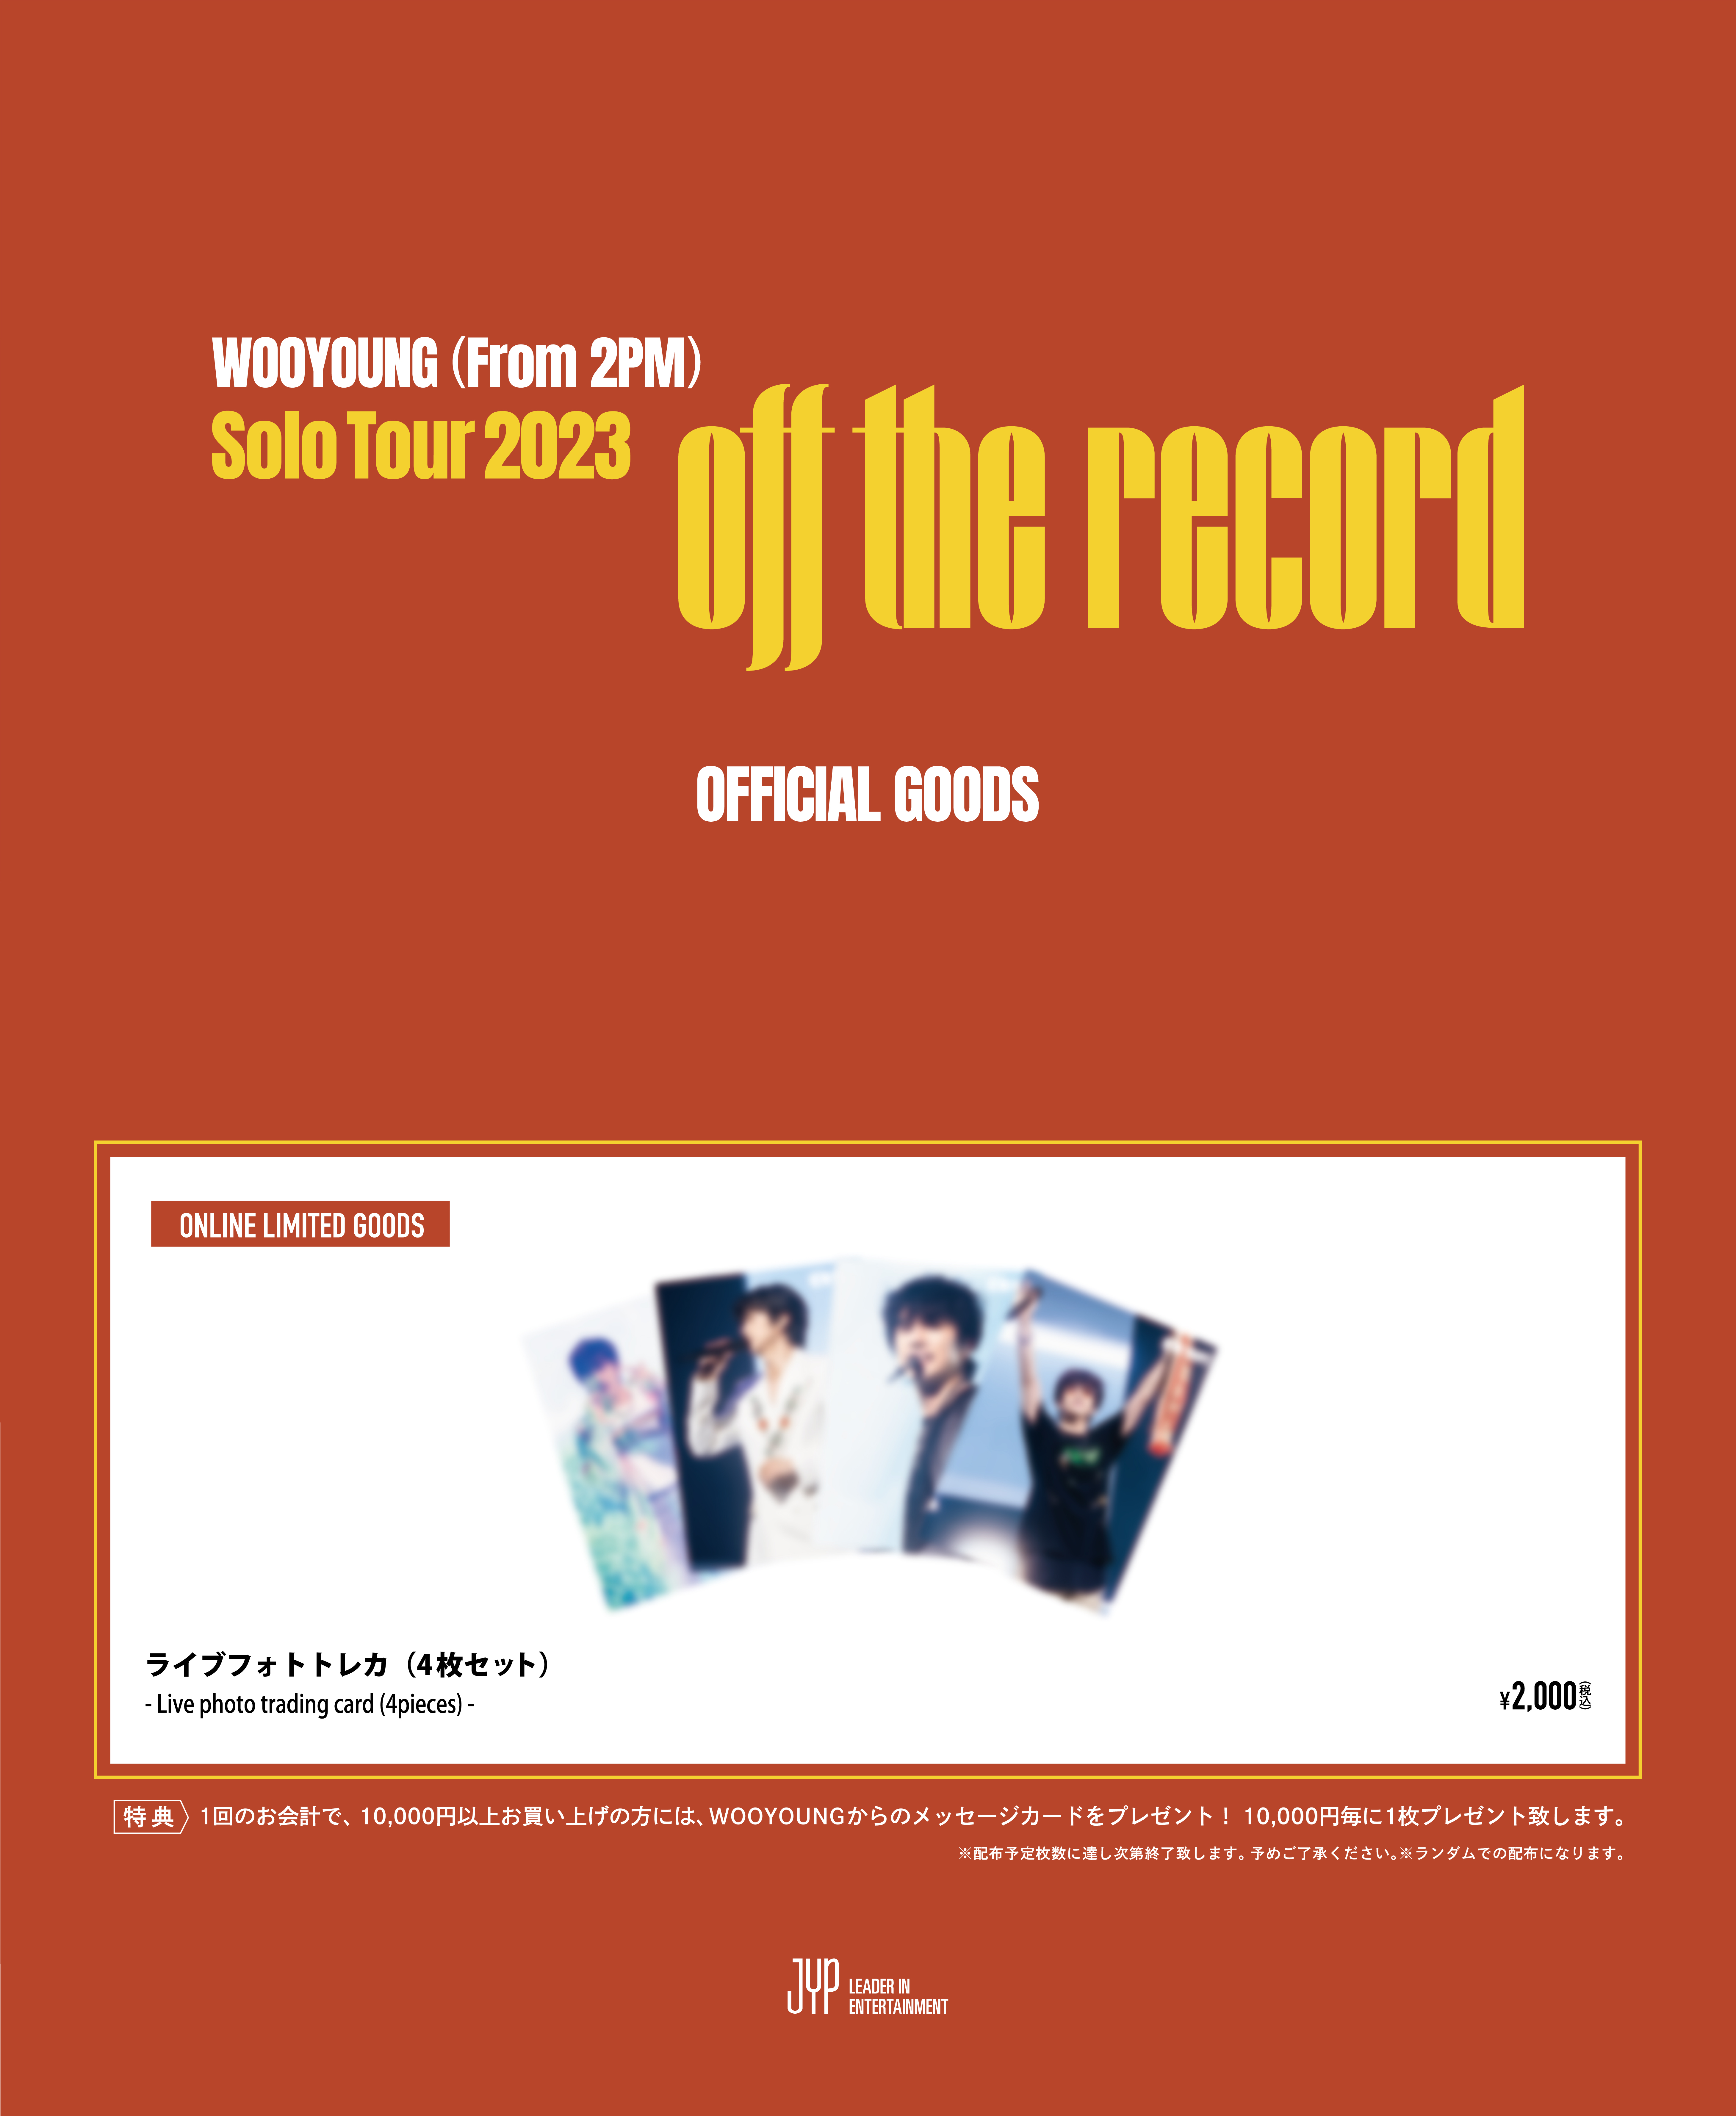 WOOYOUNG (From 2PM) Solo Tour 2023 “Off the record”オフィシャル